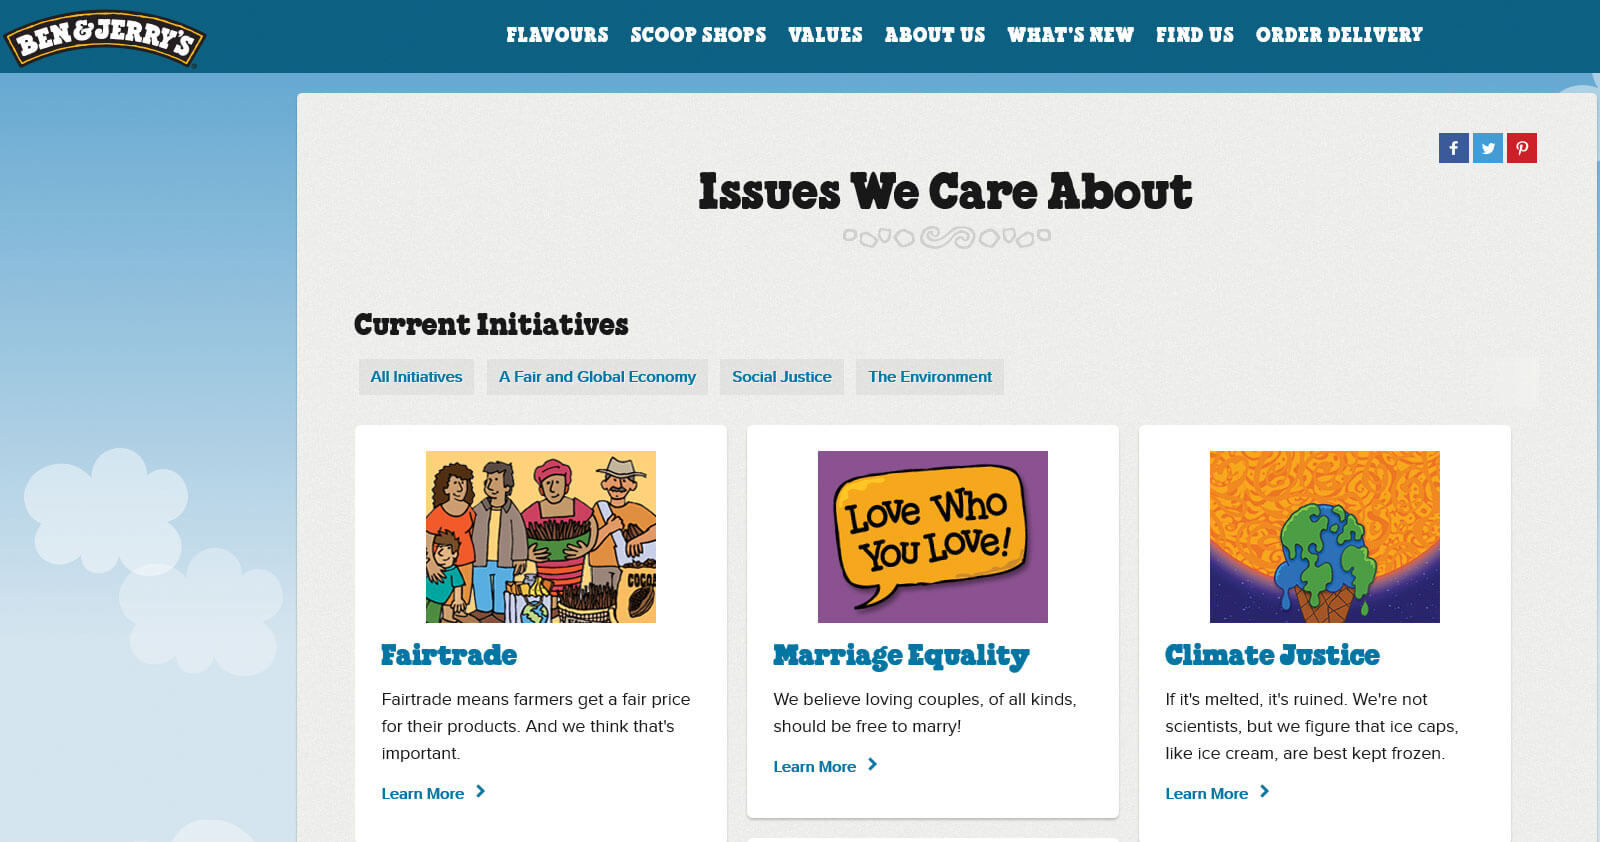 Ben & Jerry's issues we care about: Fairtrade, Marriage Equality, Climate Justice.